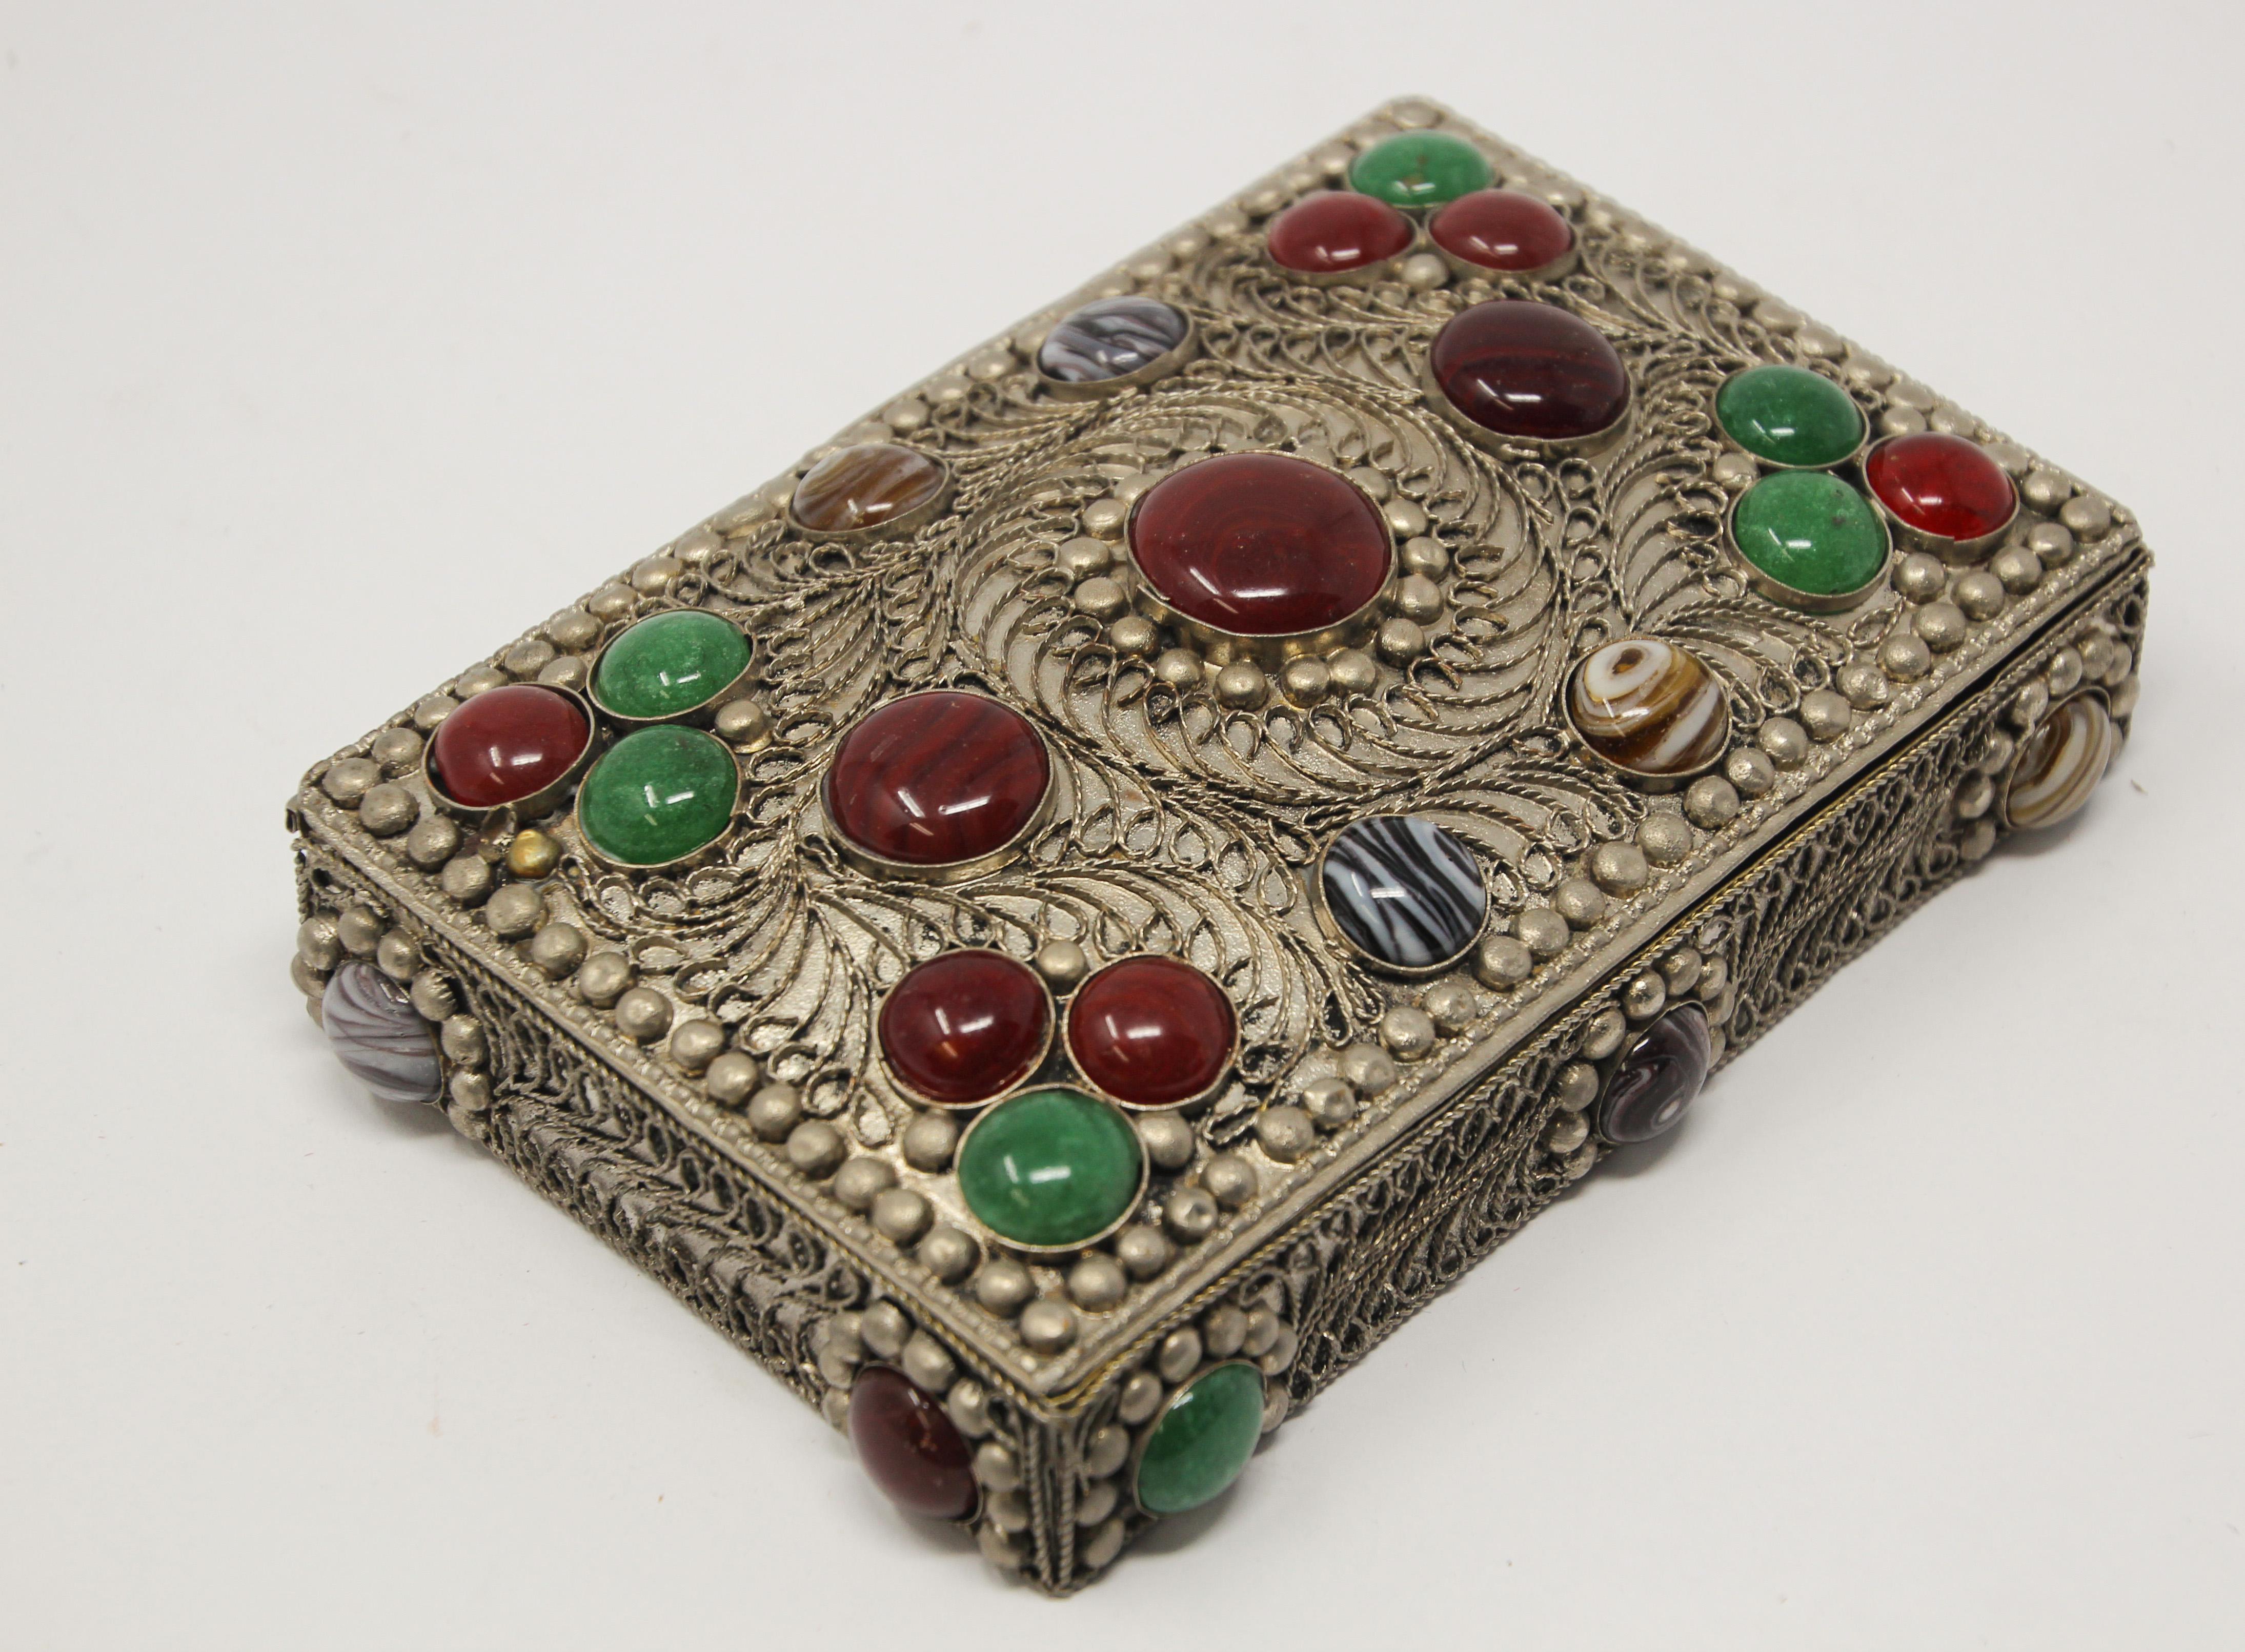 Vintage Moroccan jewelry box inlaid with semi-precious agate stones and covered with silvered metal filigree.
Moorish Middle East jewelry dressing box, very impressive.
Brass silvered vintage trinket box.
   